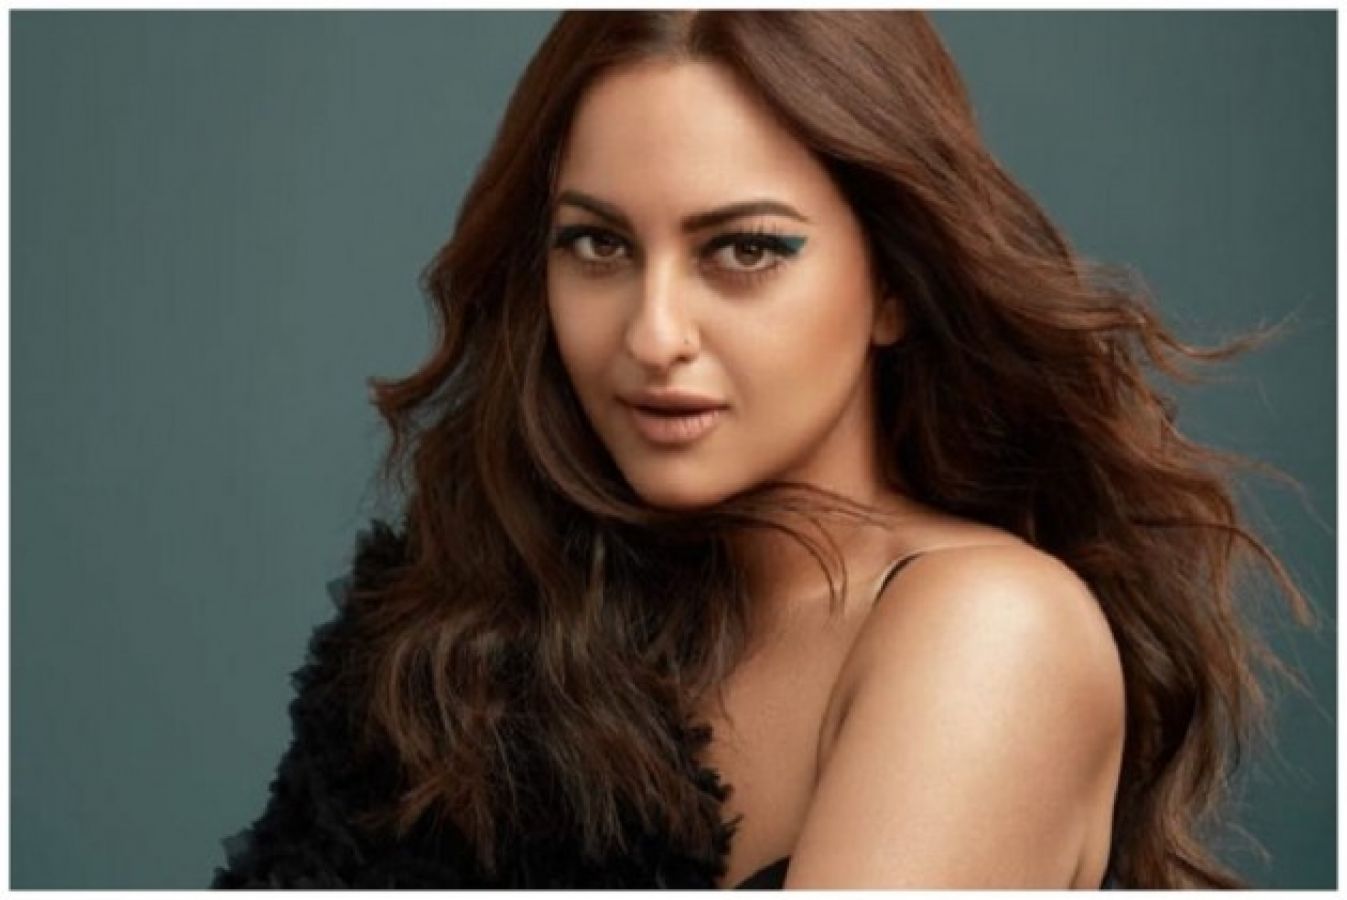 1347px x 900px - Sonakshi Sinha's hot and sexy ad shoot is setting social media on fire |  NewsTrack English 1